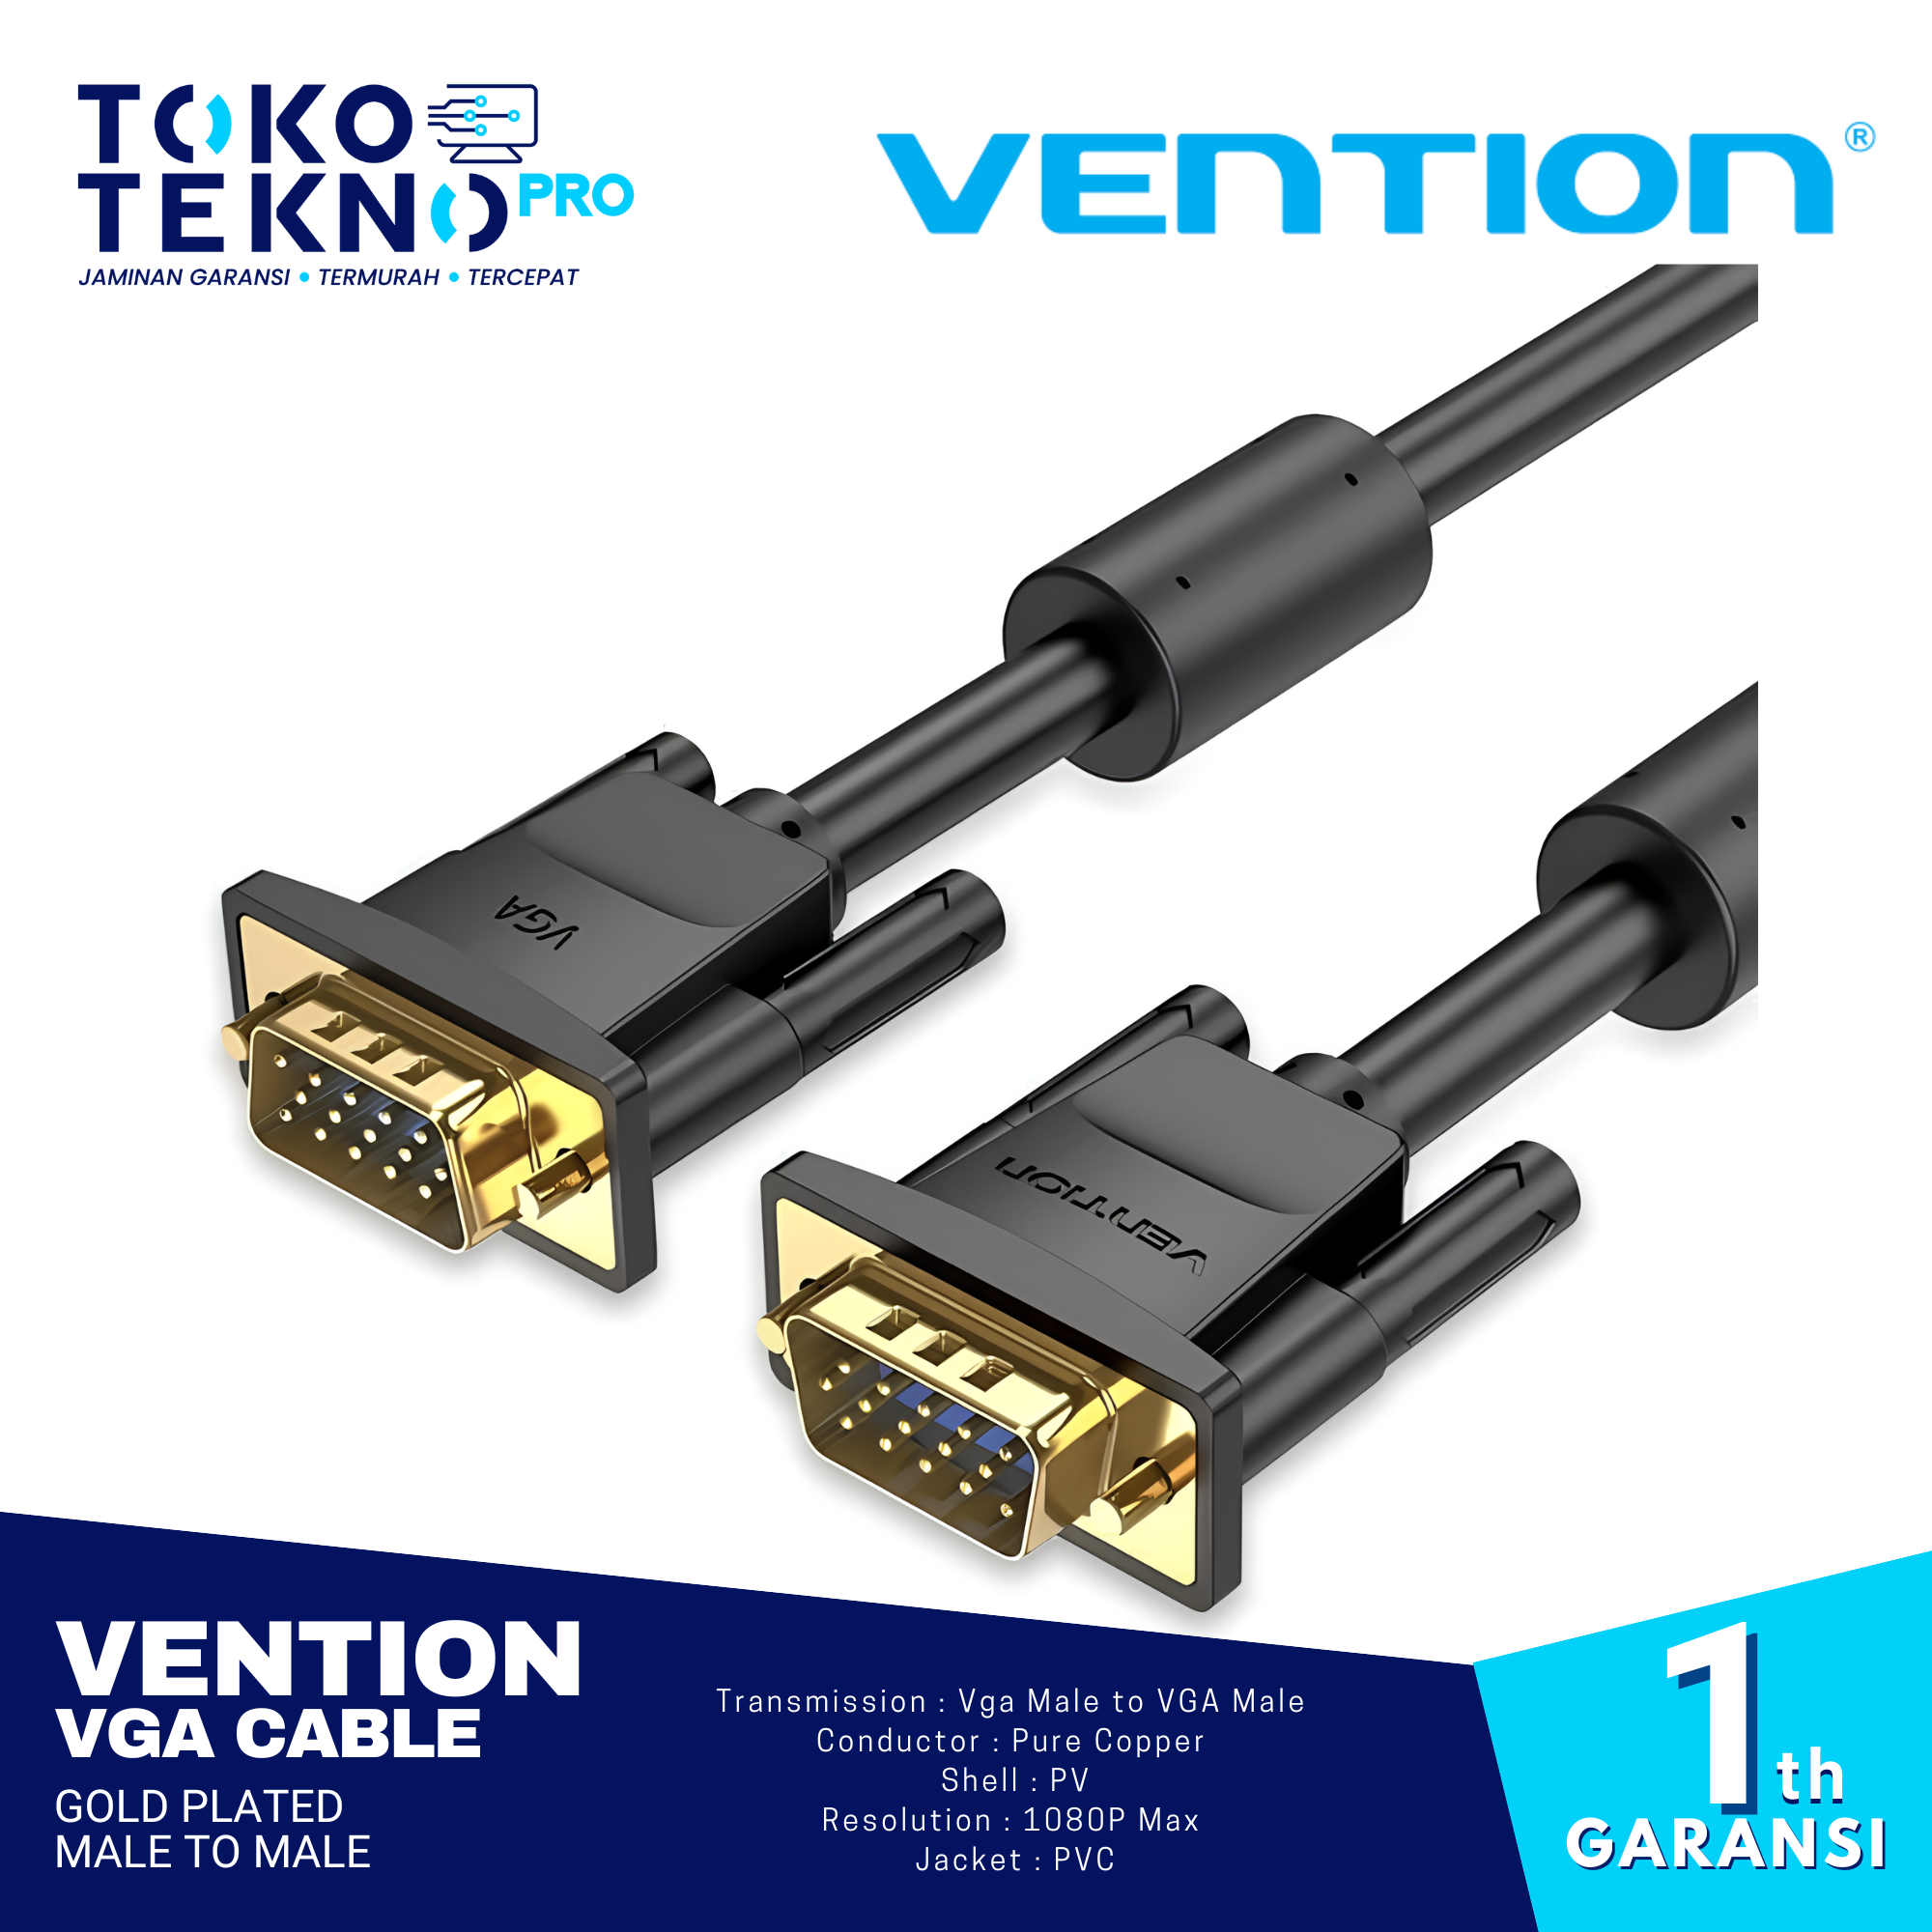 Vention VGA Cable Kabel Gold Plated Male To Male Premium Quality